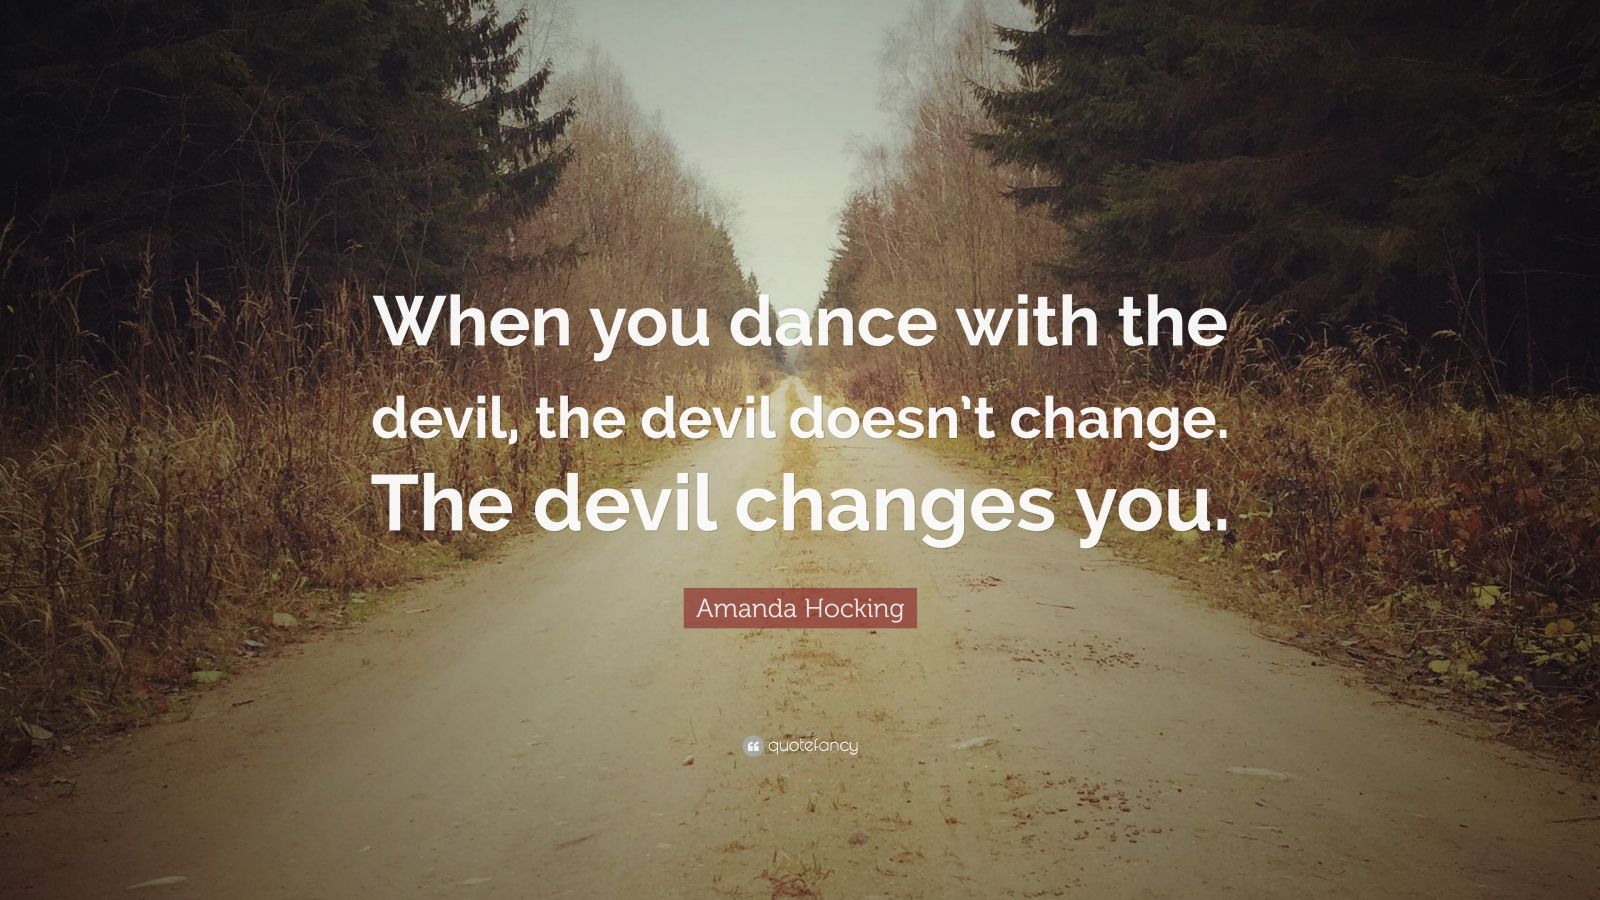 Amanda Hocking Quote: “When you dance with the devil, the devil doesn’t